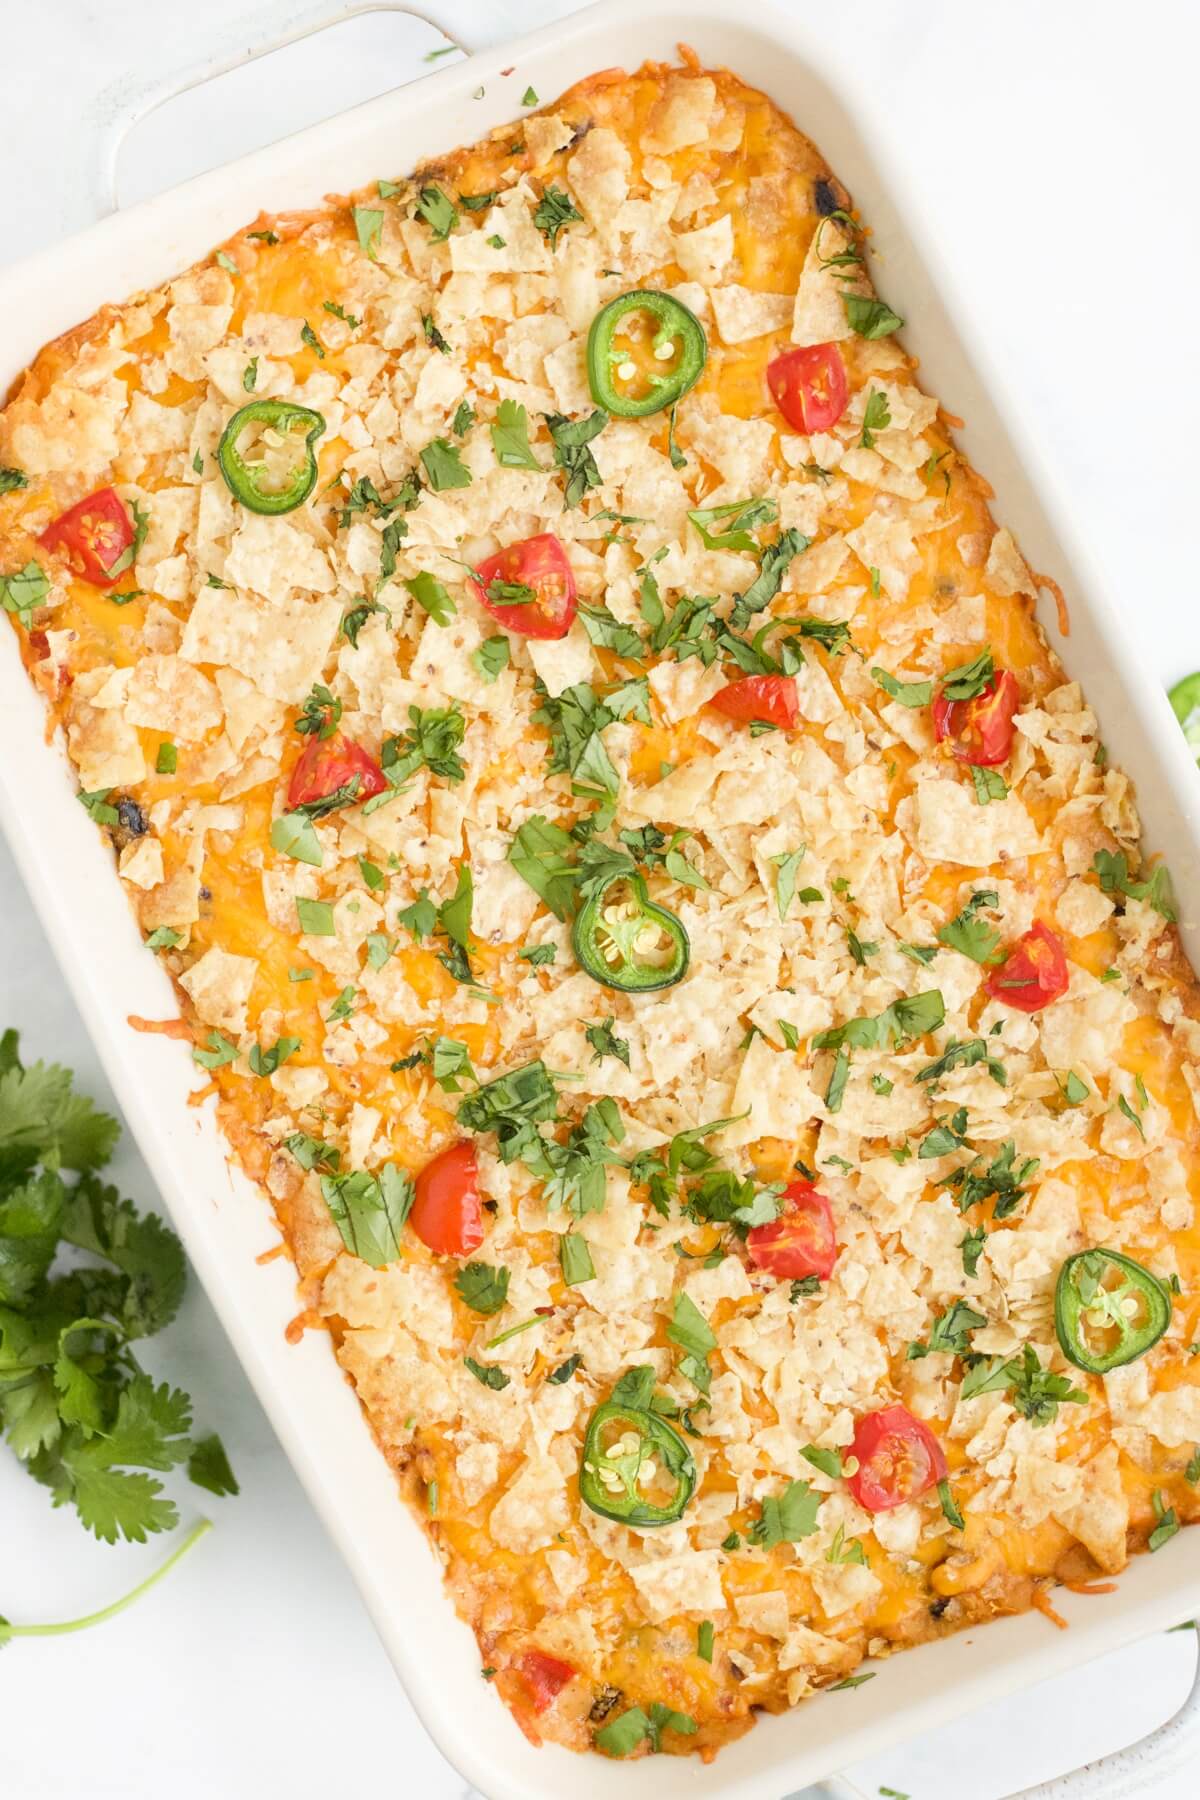 Chicken taco casserole in baking dish topped with chips.